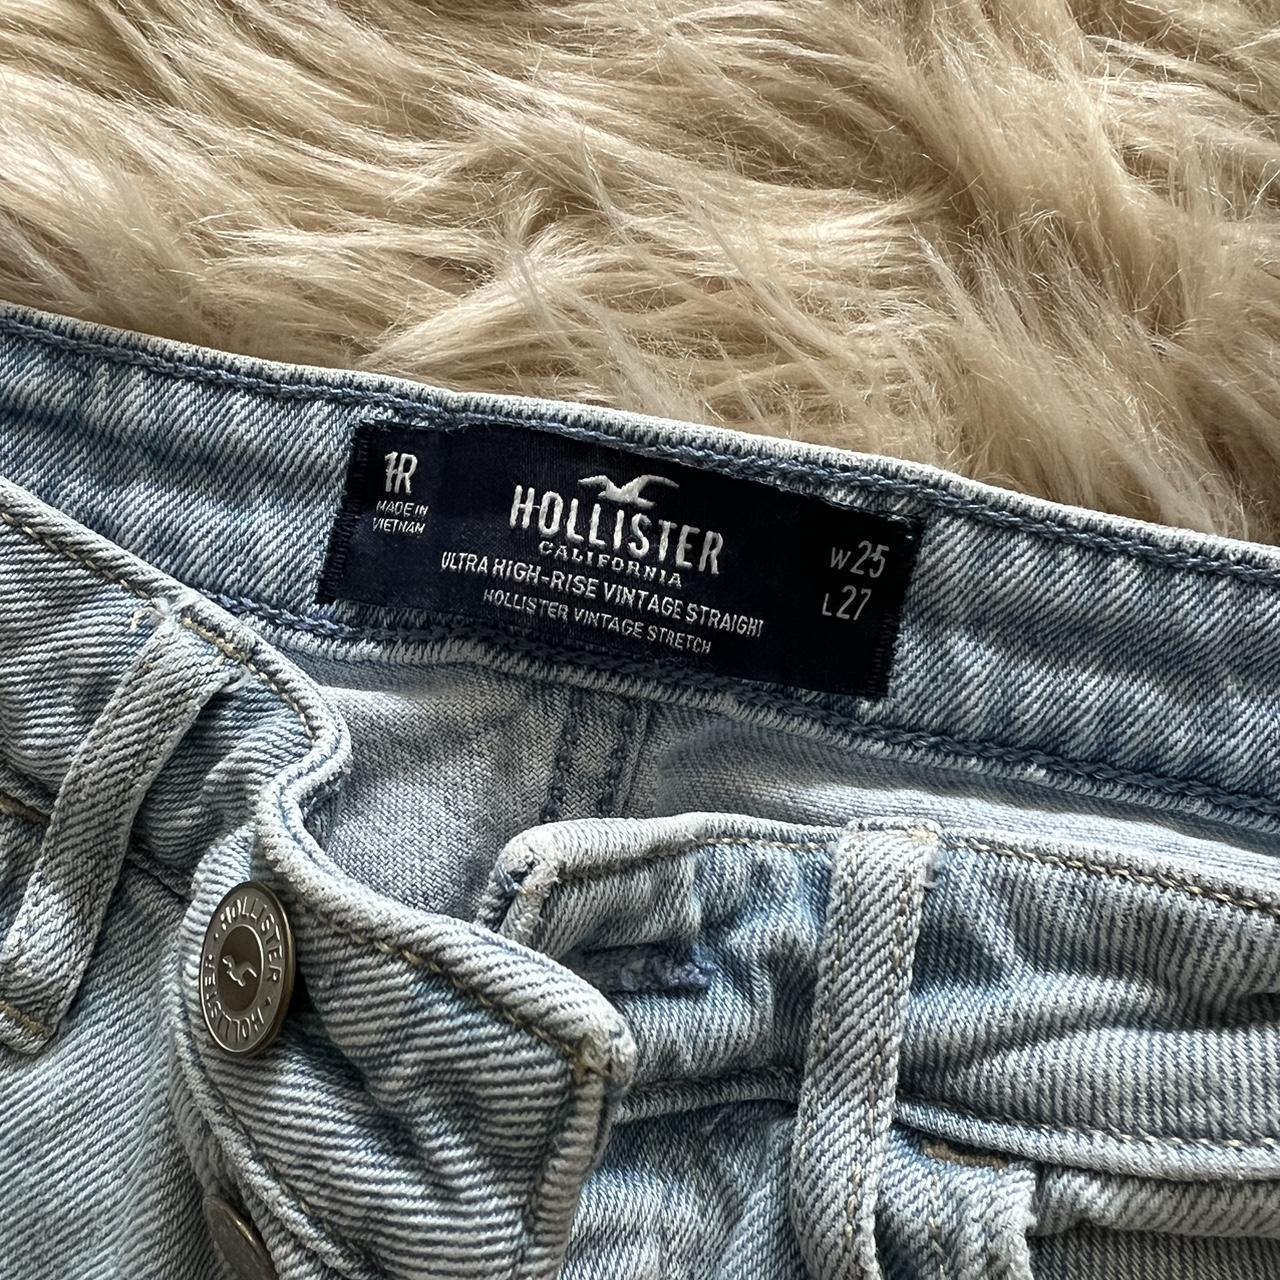 hollister straight leg light wash jeans with a rip